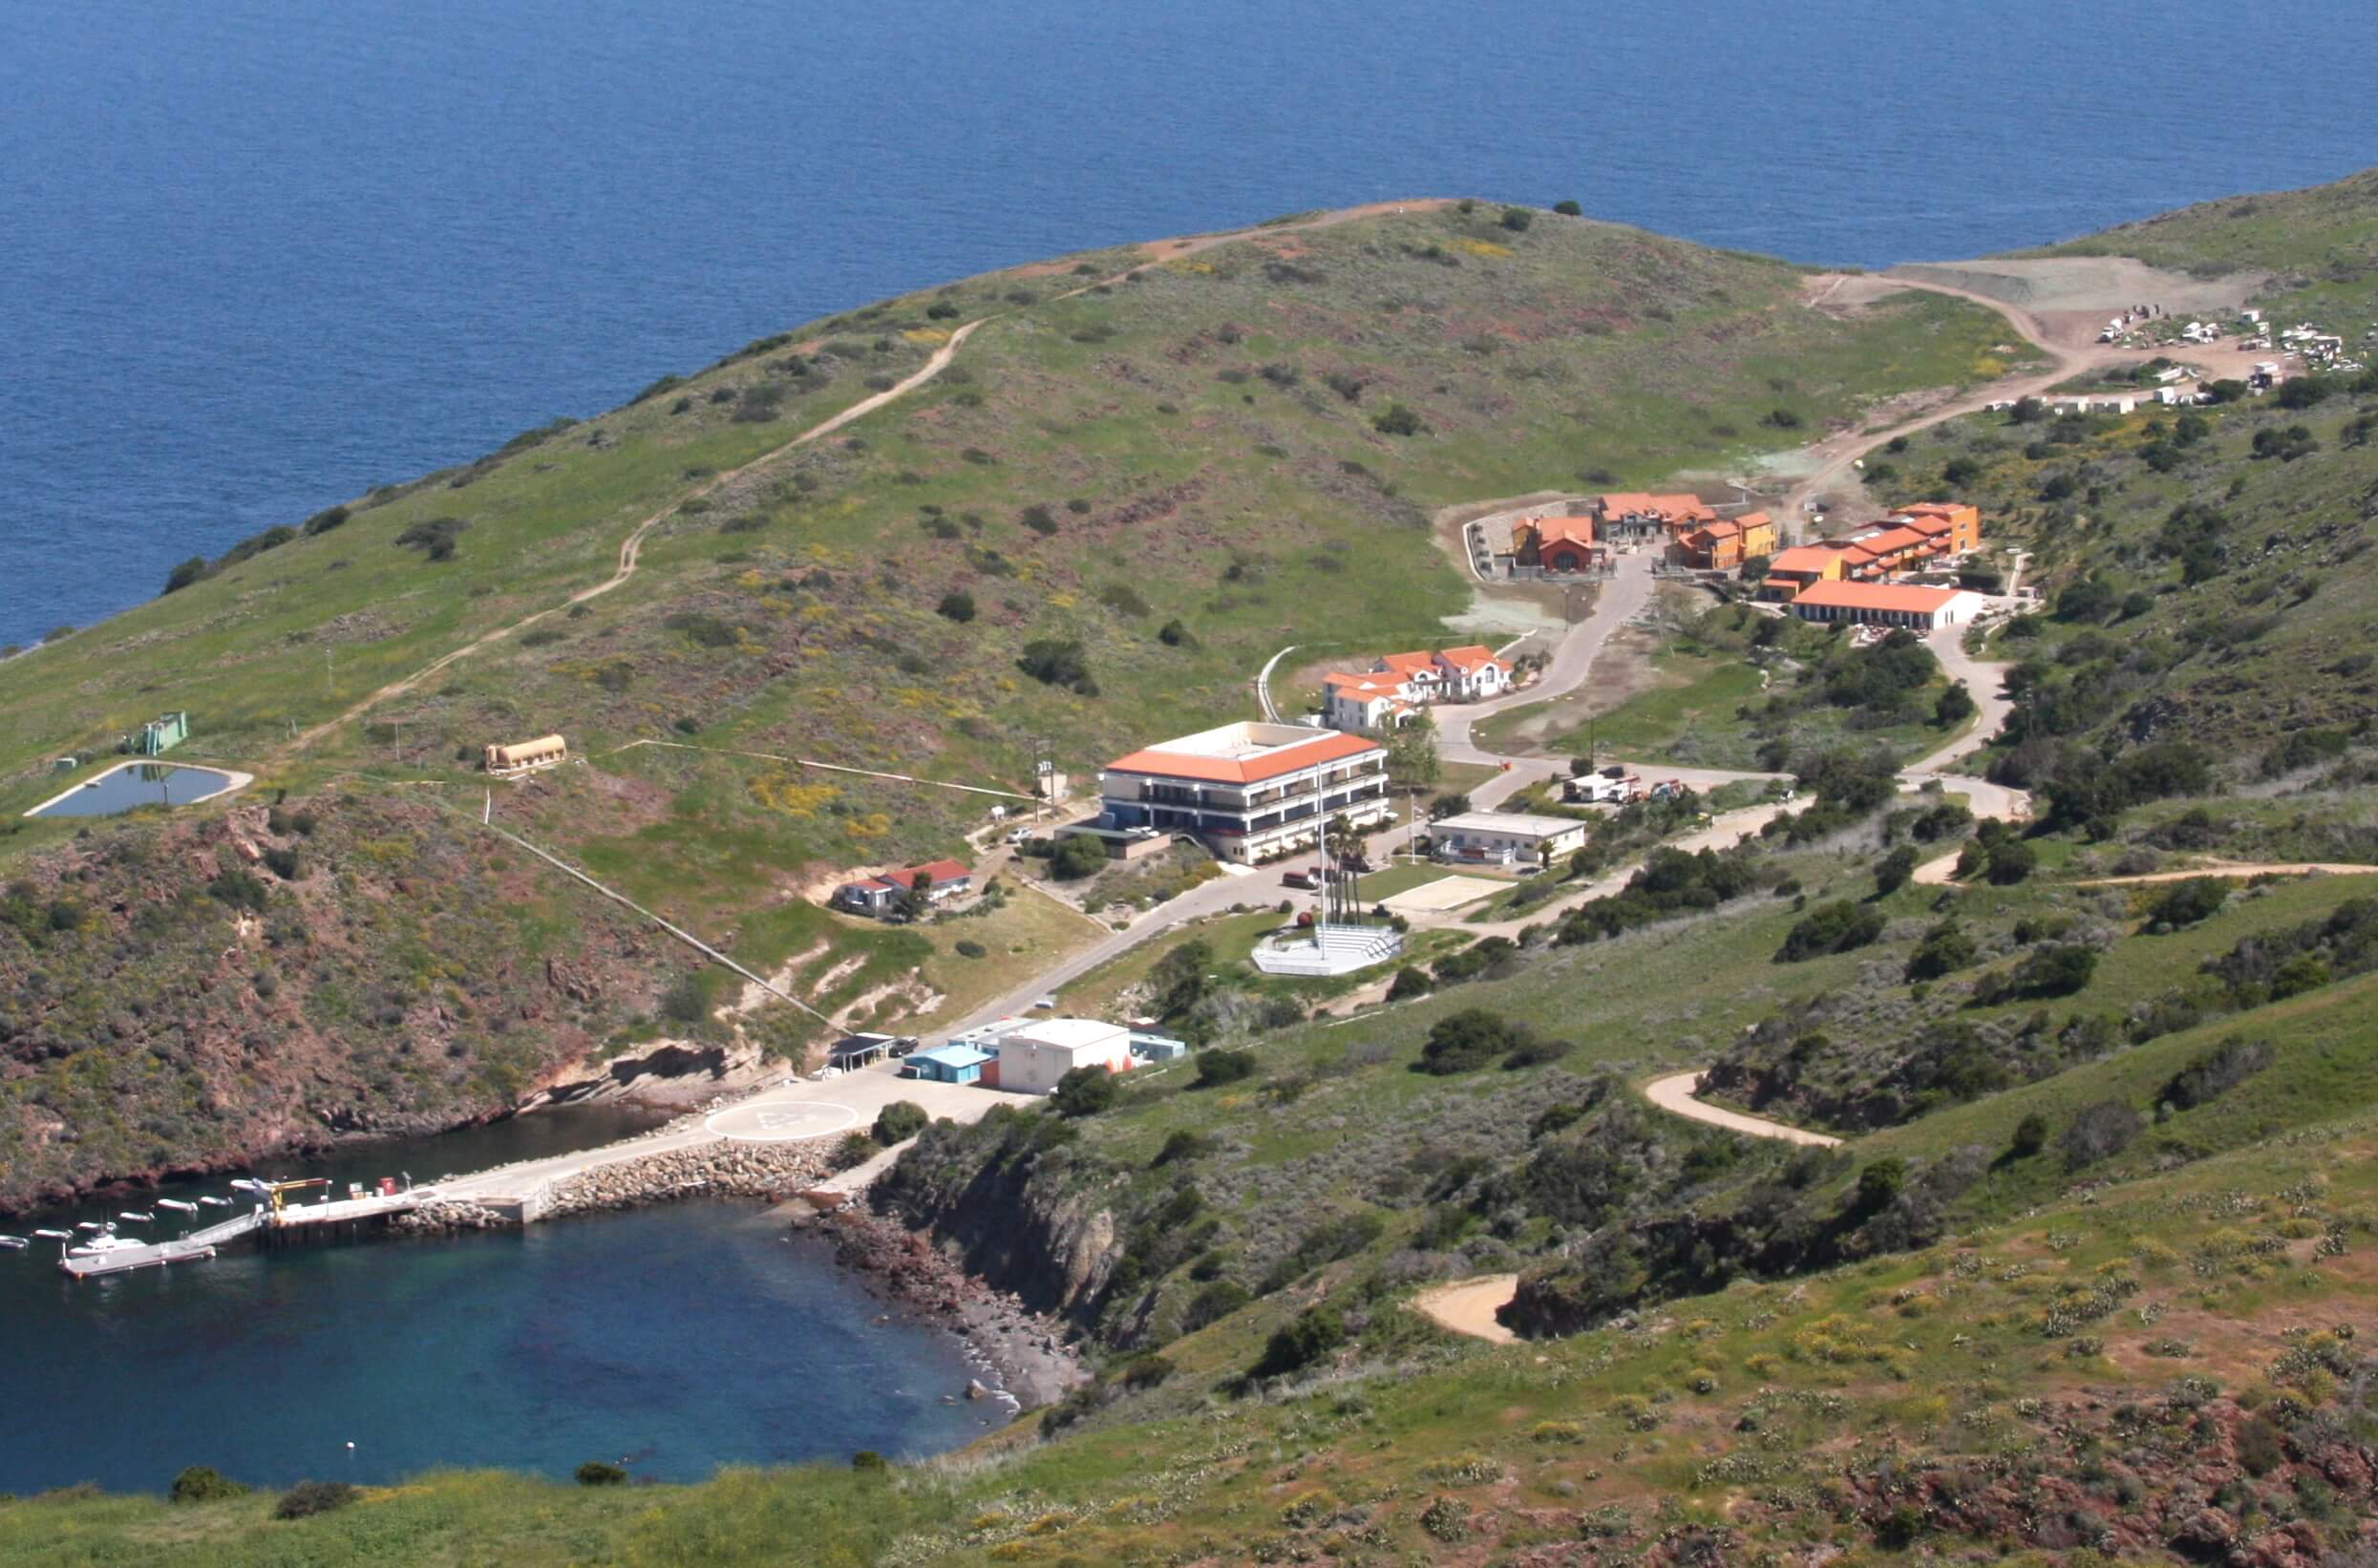 a drone photo of the Wrigley Marine Science Center, showing a group of red and white buildings along a short road leading down to a cove and boat dock